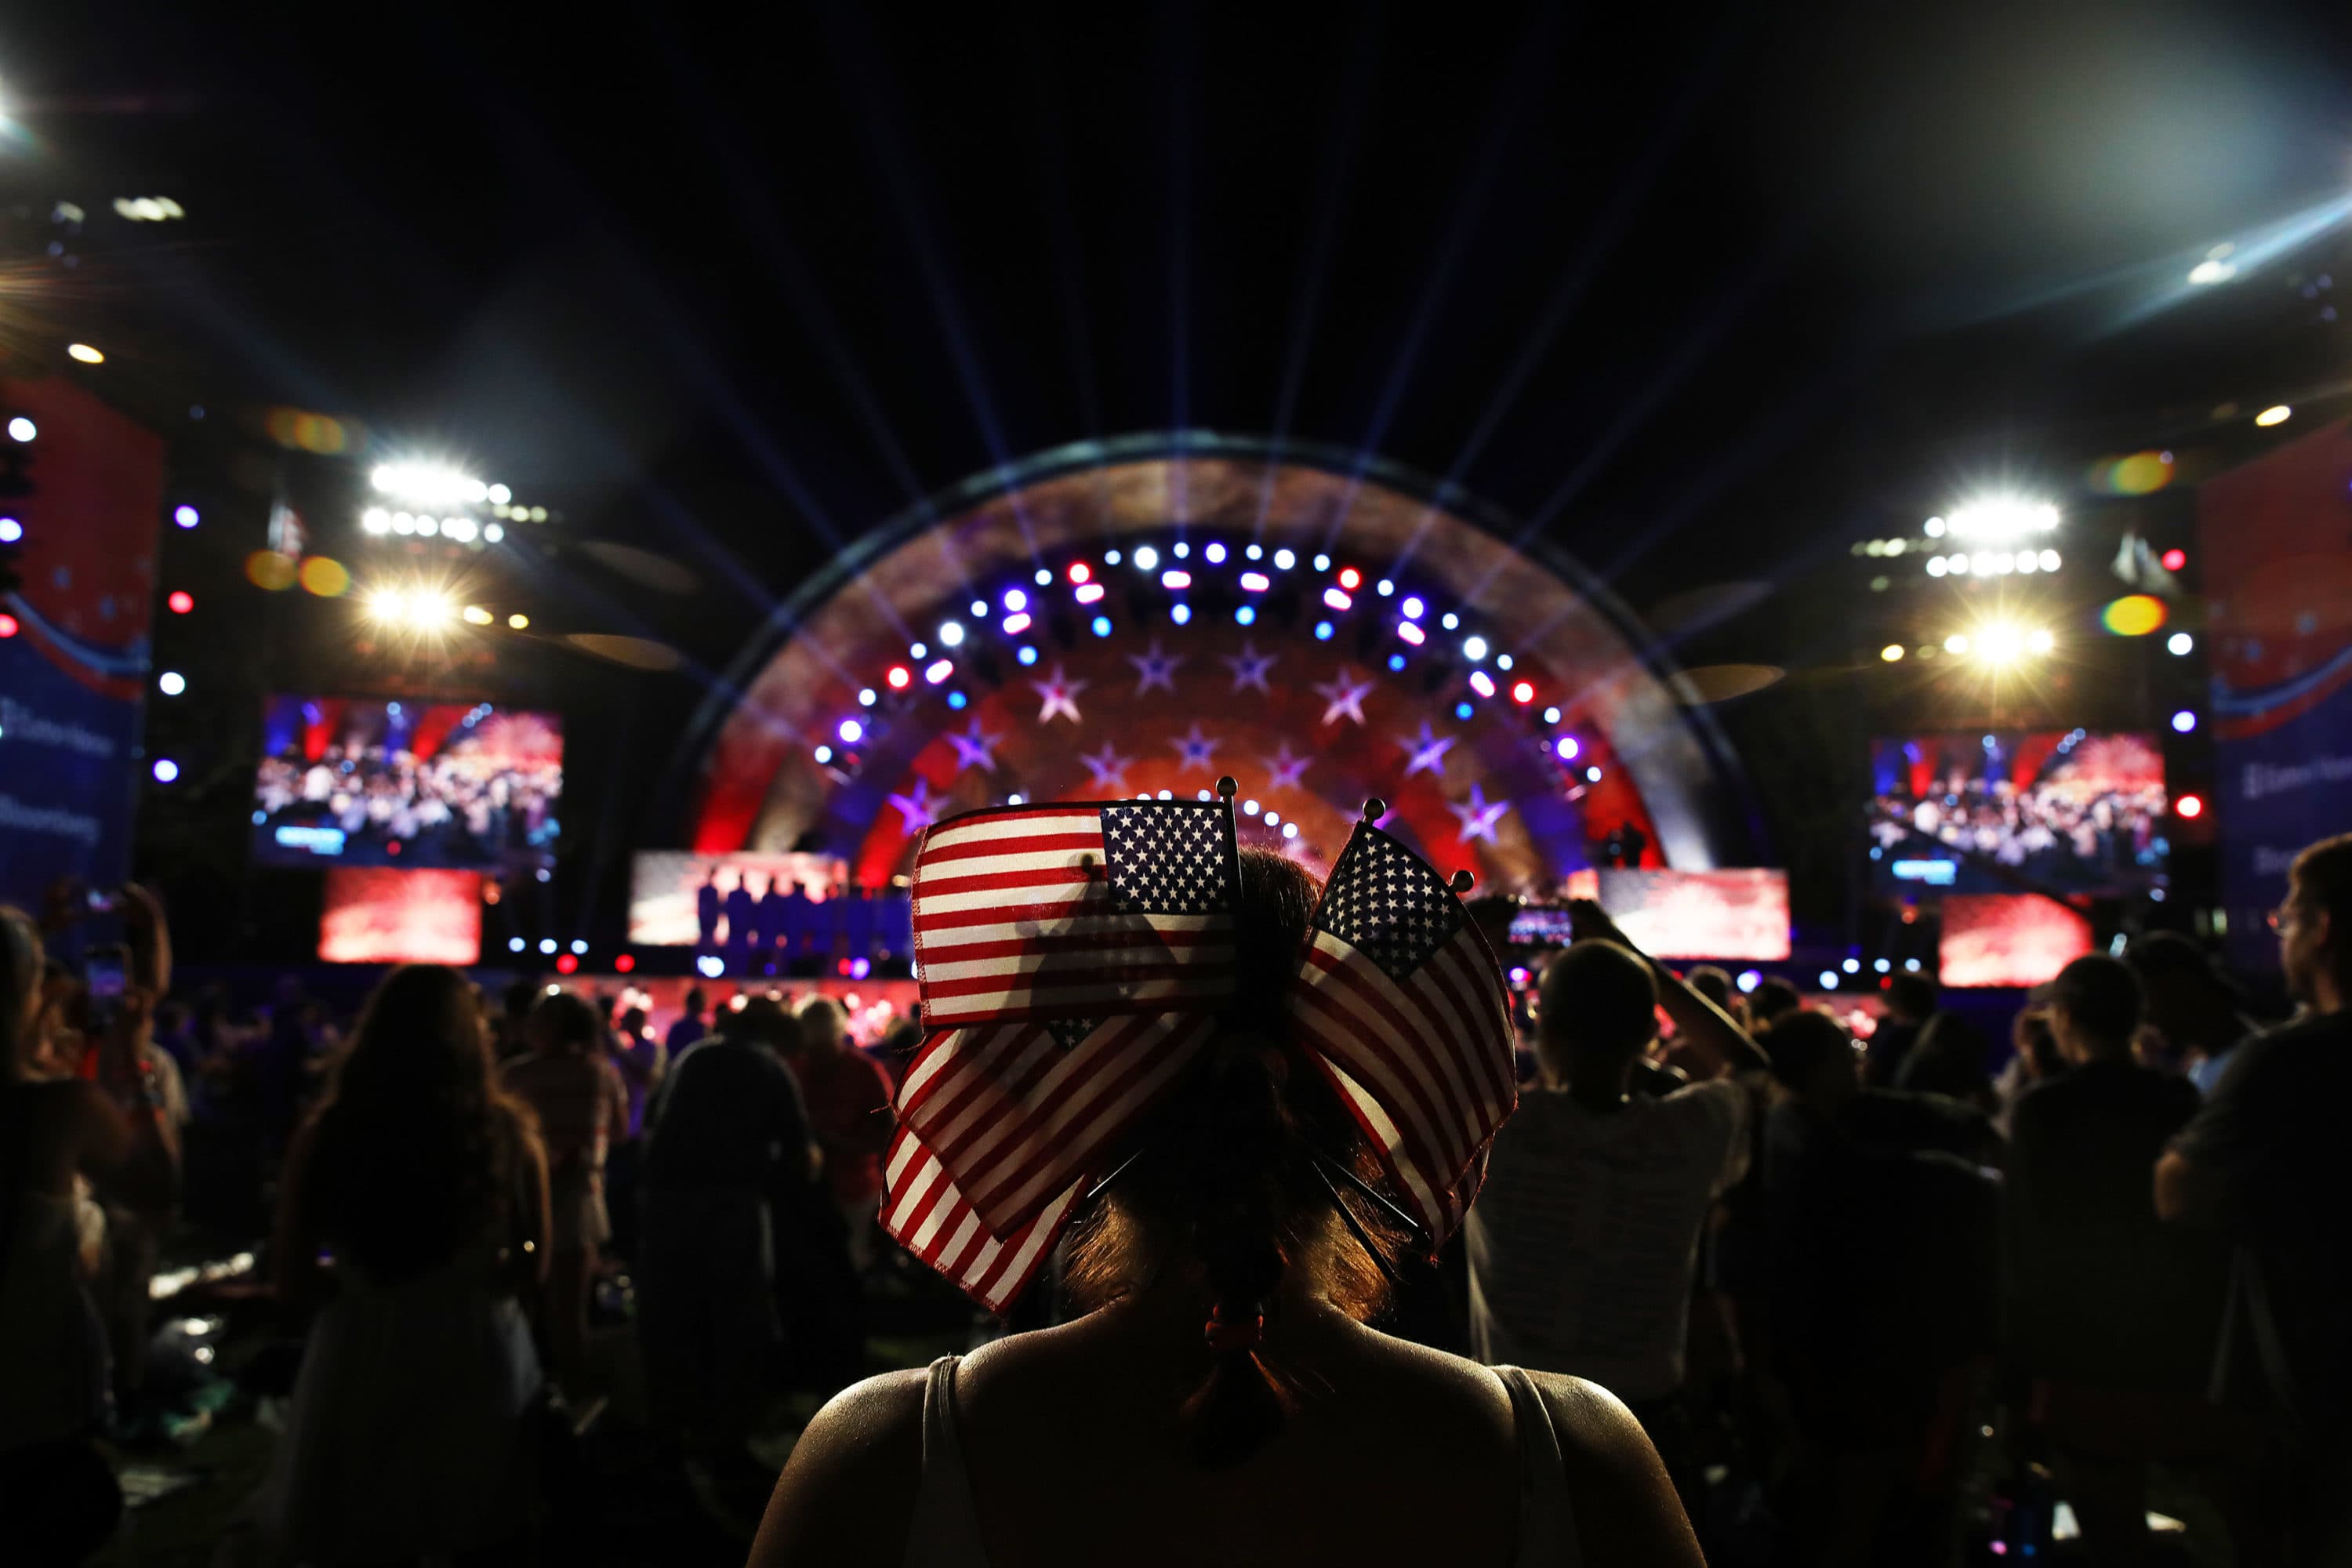 A woman watches the Boston Pops Orchestra perform during the Boston Pops Fireworks Spectacular at the DCR Hatch Shell on the Esplanade in Boston, MA on July 4, 2019. (Erin Clark for The Boston Globe via Getty Images)